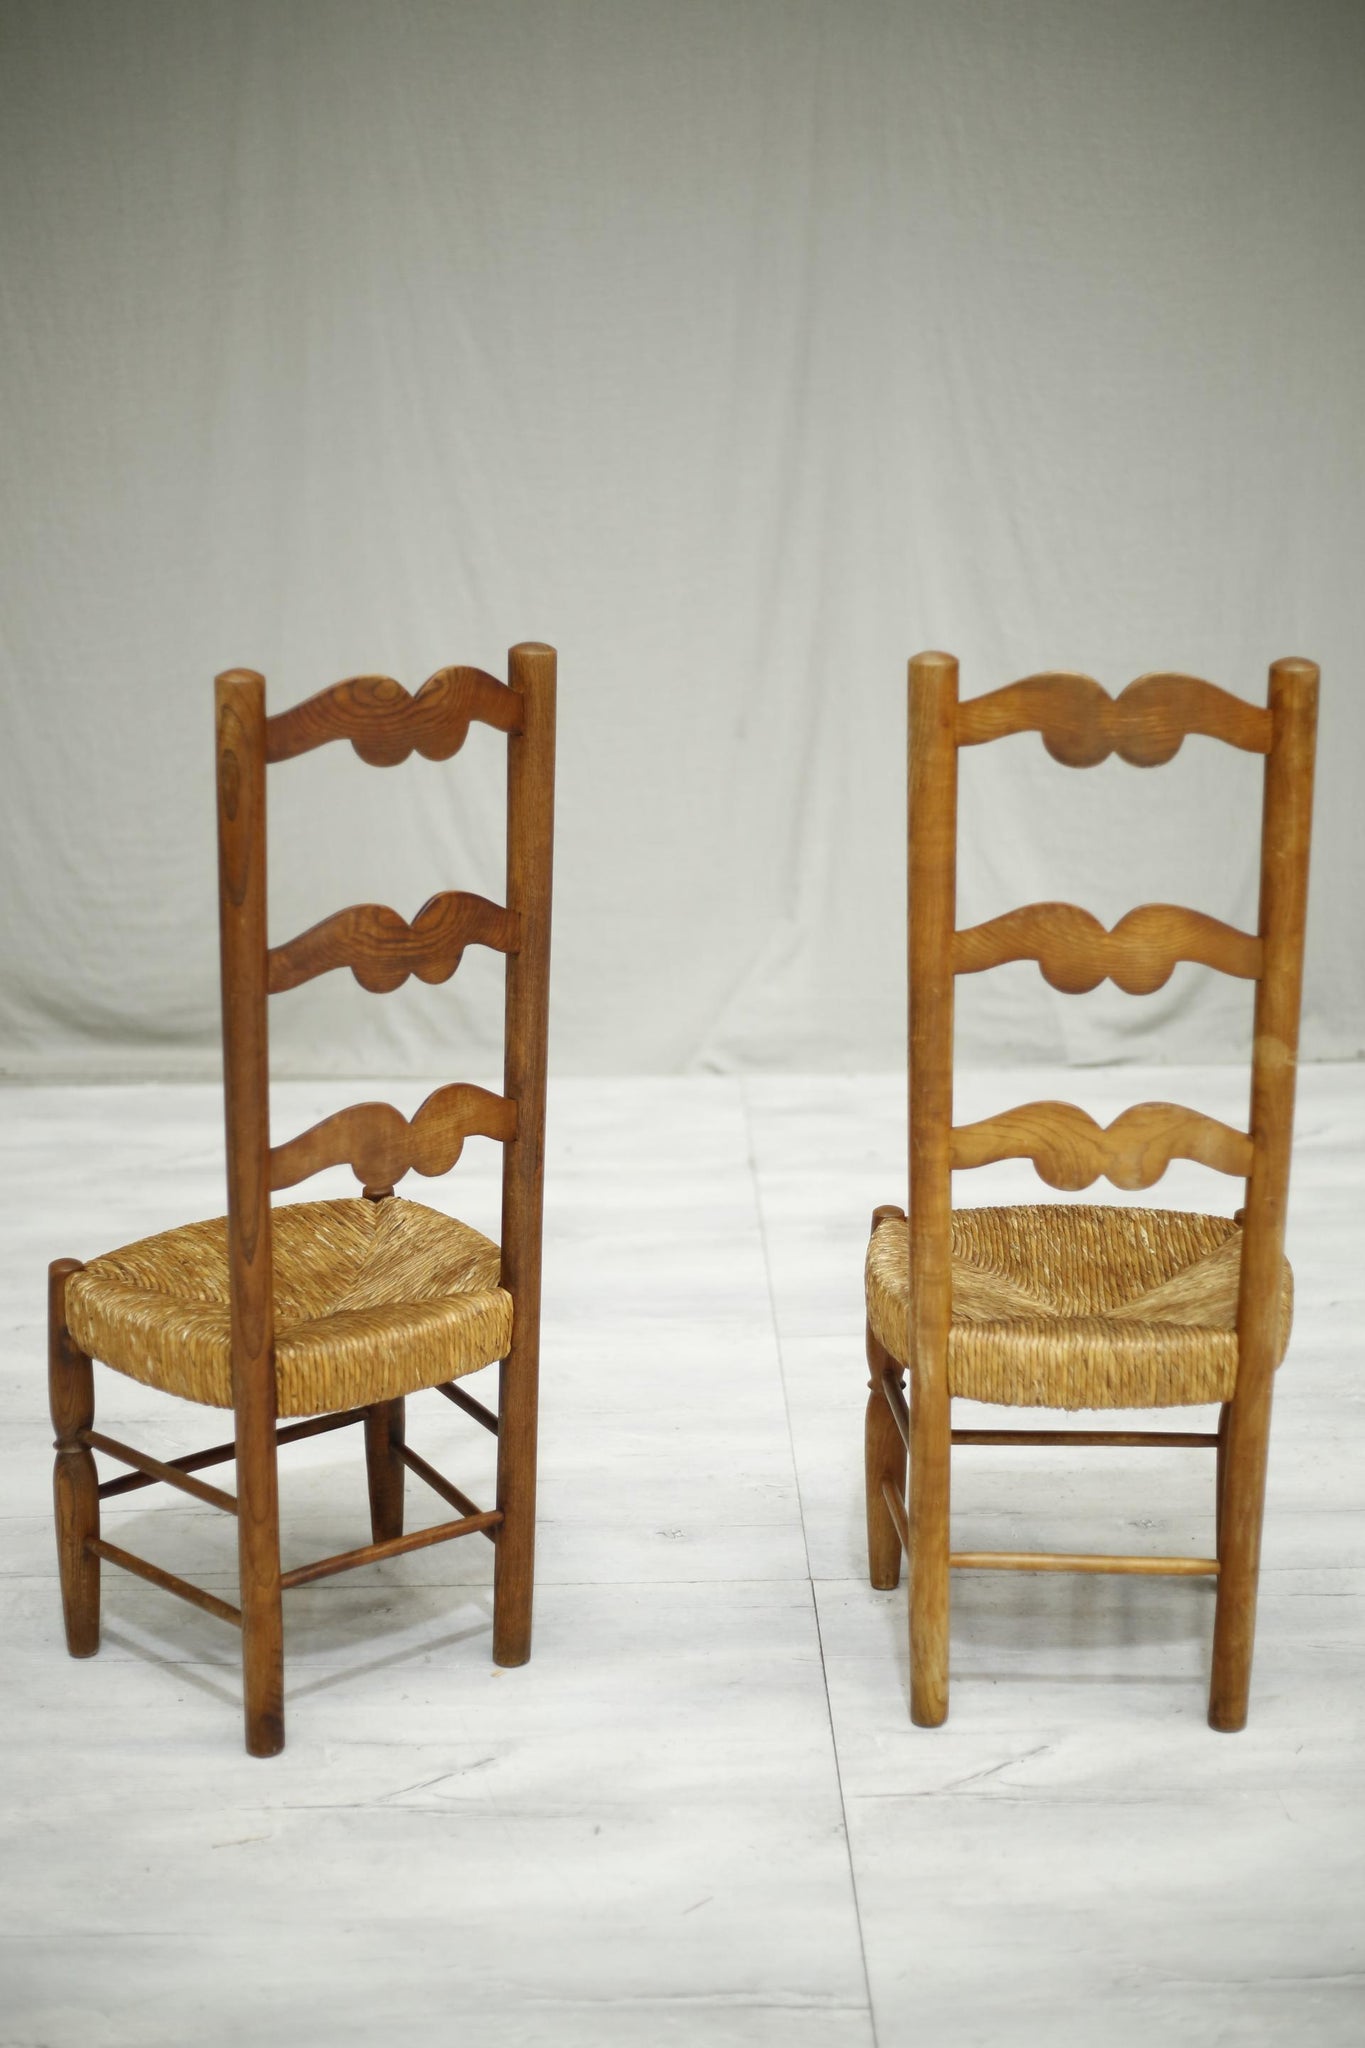 Set of 4 Antique Swedish rush seated dining chairs